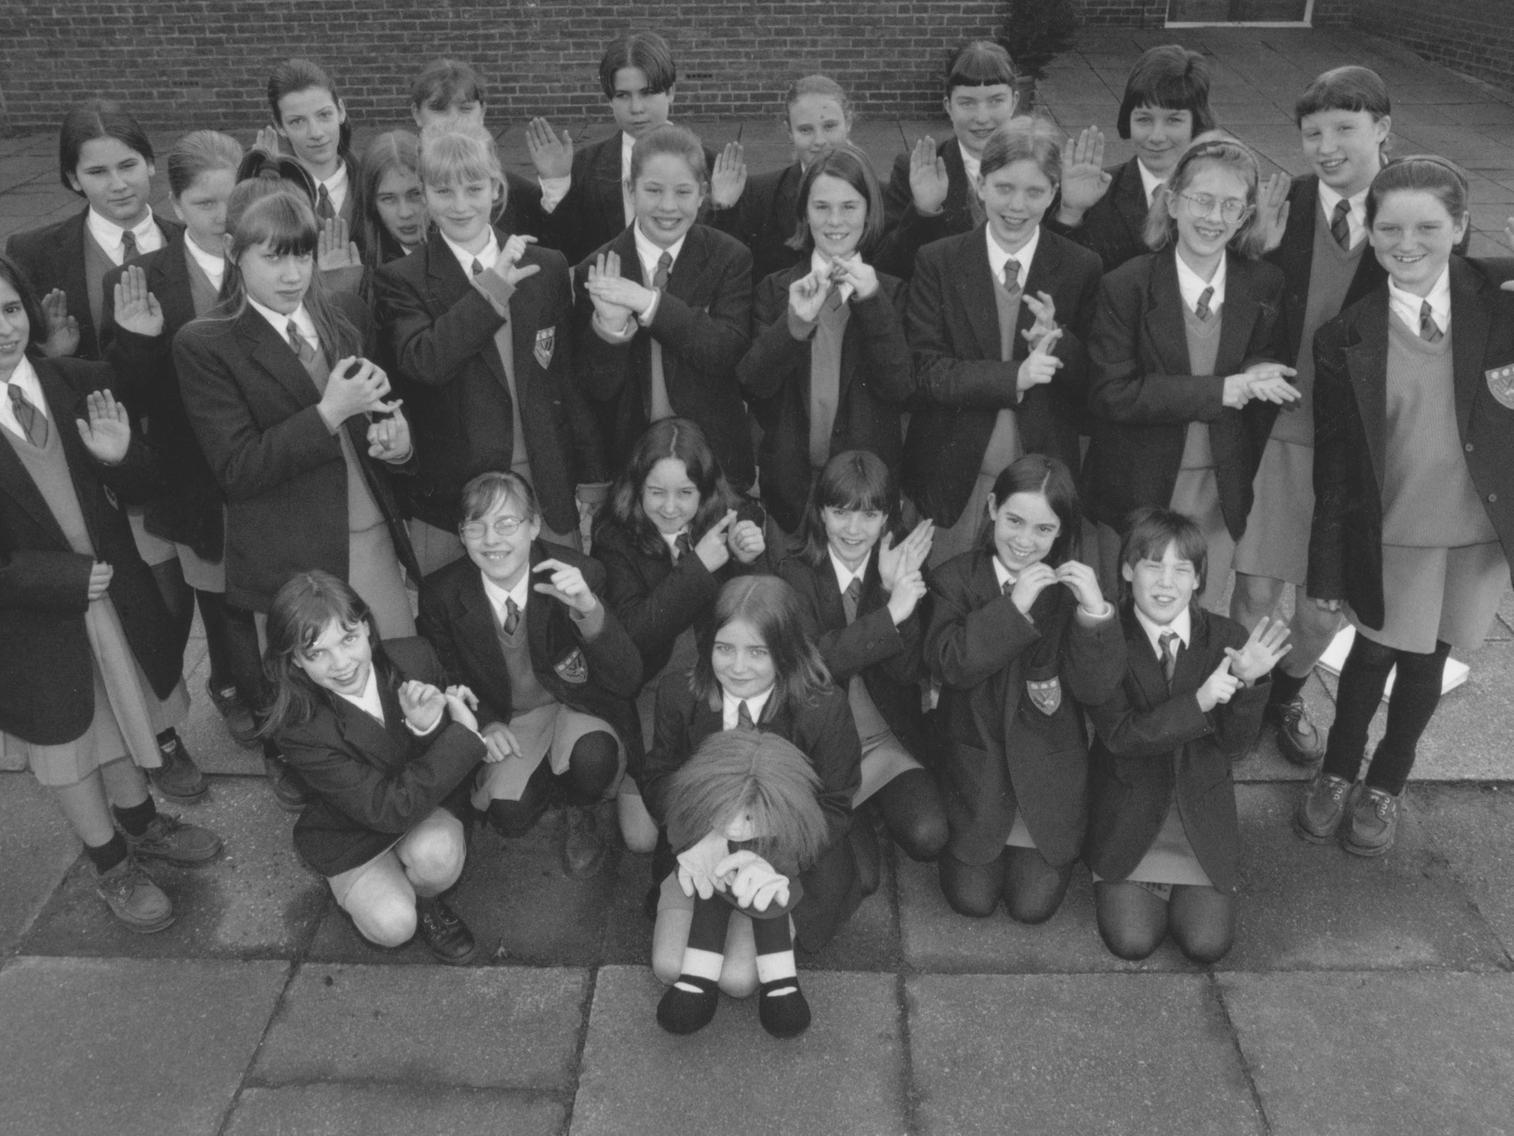 Pupils from the signing class at Scalby School are pictured signing, from the front, the Scalby School Welcome, in March 1997. At the front is Molly, a doll which pupils used like a puppet to help them learn sign language.